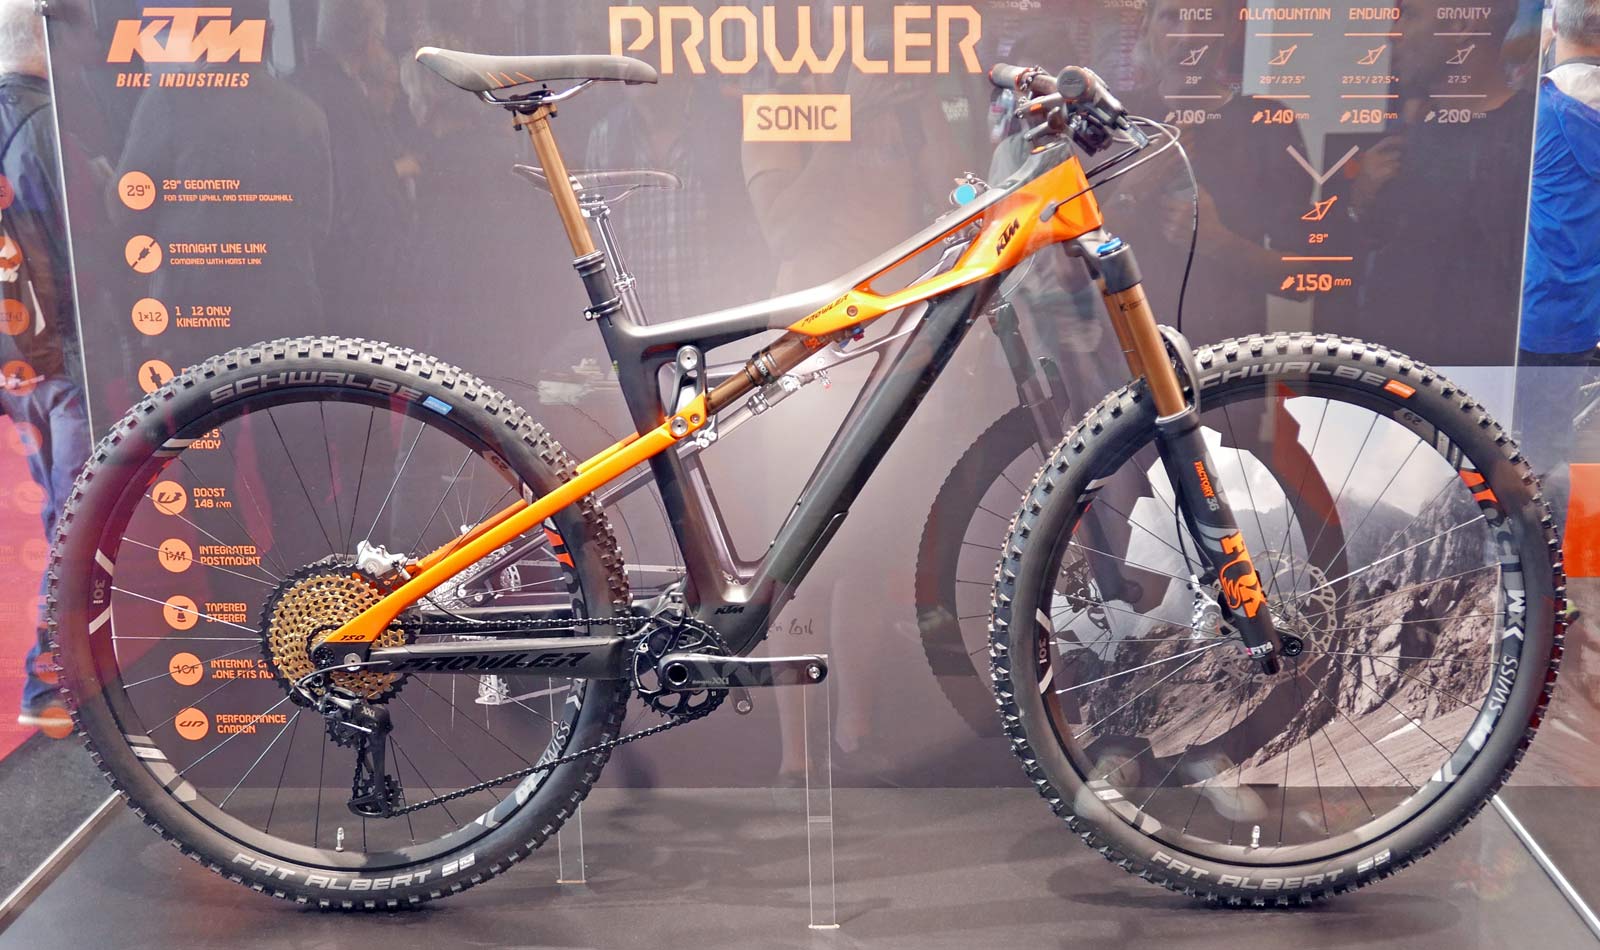 EB17: KTM offers a closer look at the Prowler all mountain ...